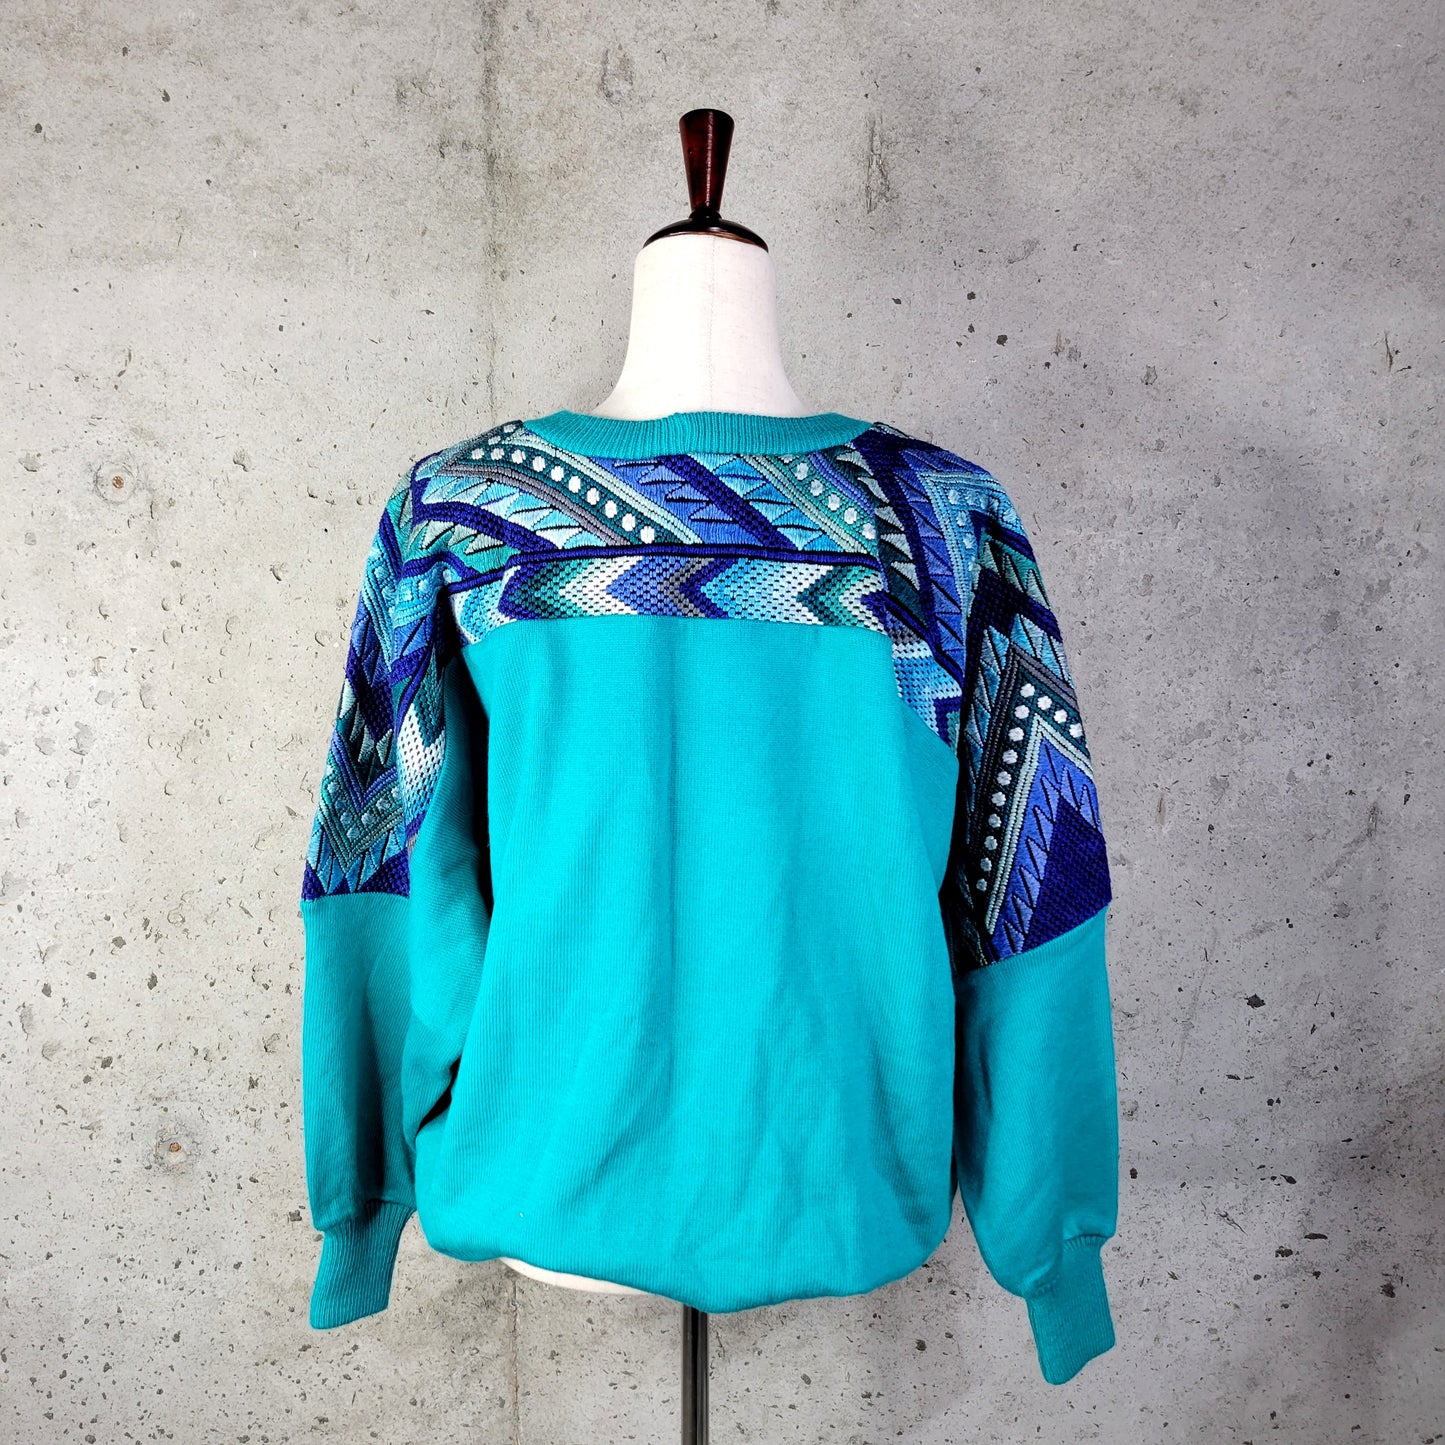 Rare Vintage Turquoise Hand Woven Tribal Sweater - XL